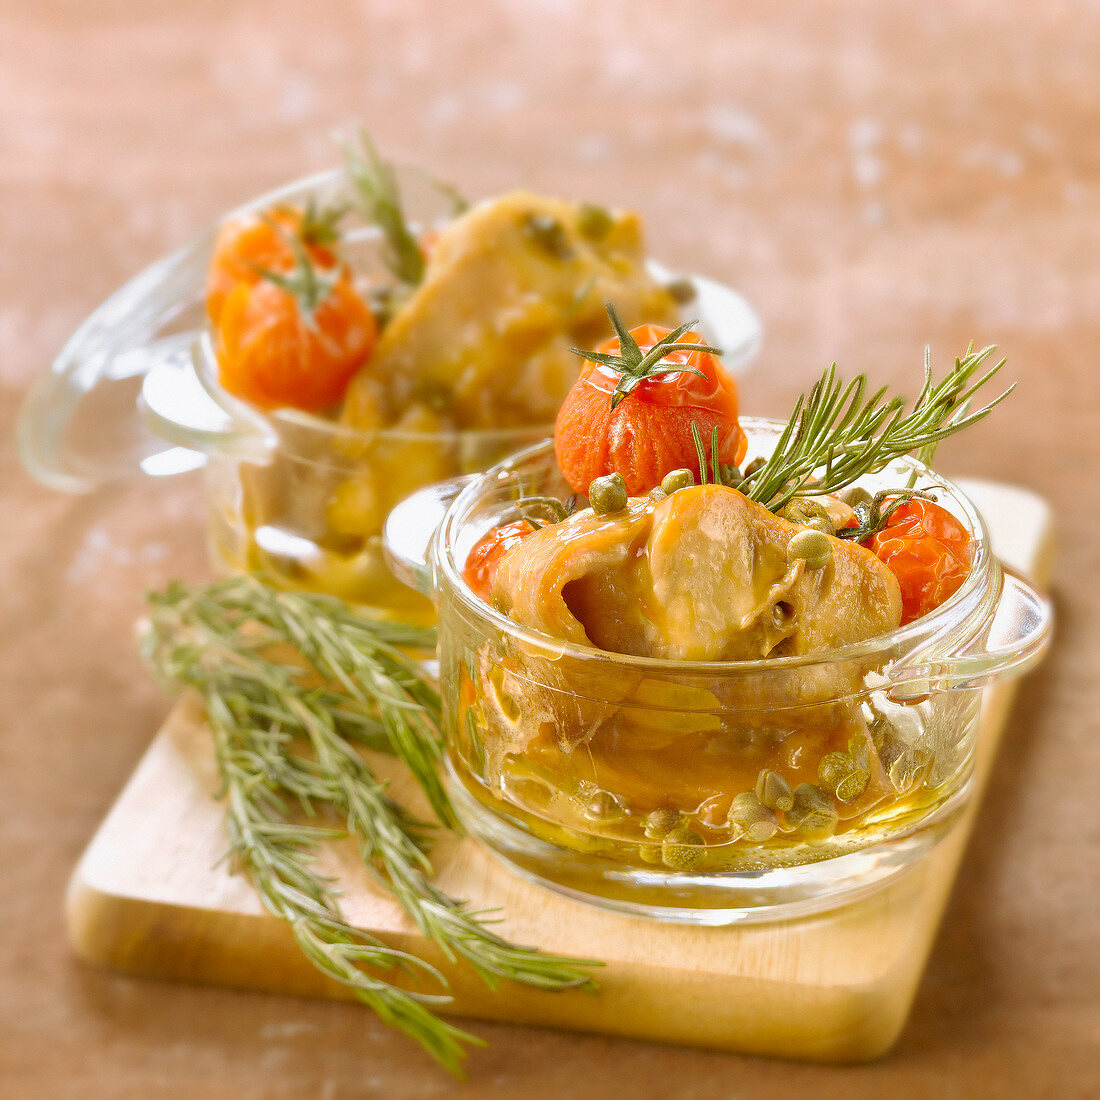 Rabbit stewed with tomatoes,capers and rosemary